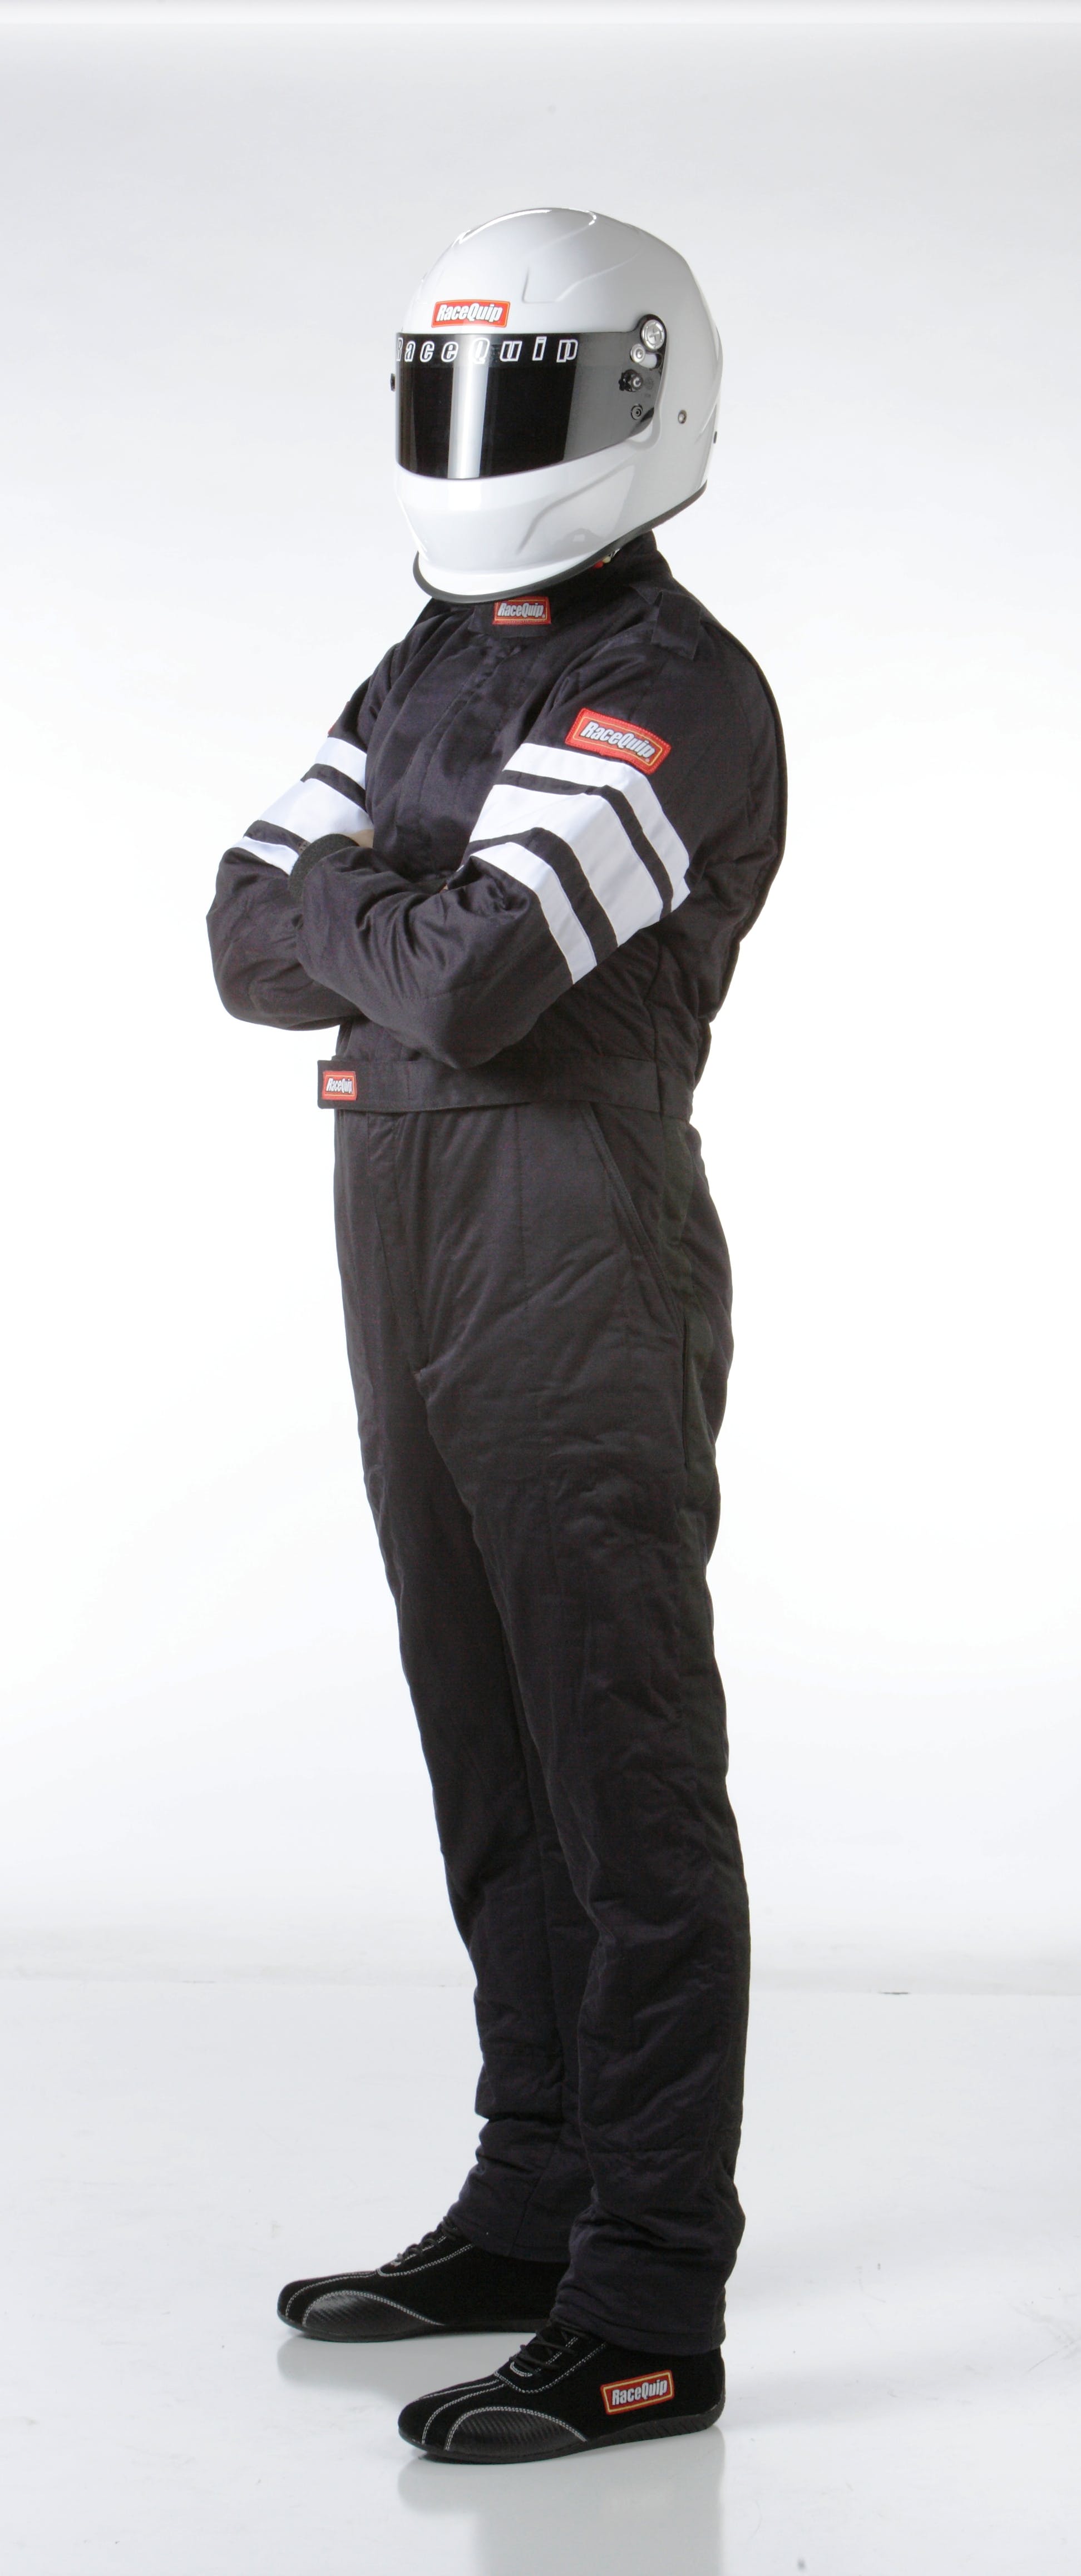 RaceQuip 120006 SFI-5 Pyrovatex One-Piece Multi-Layer Racing Fire Suit (Black, X-Large)